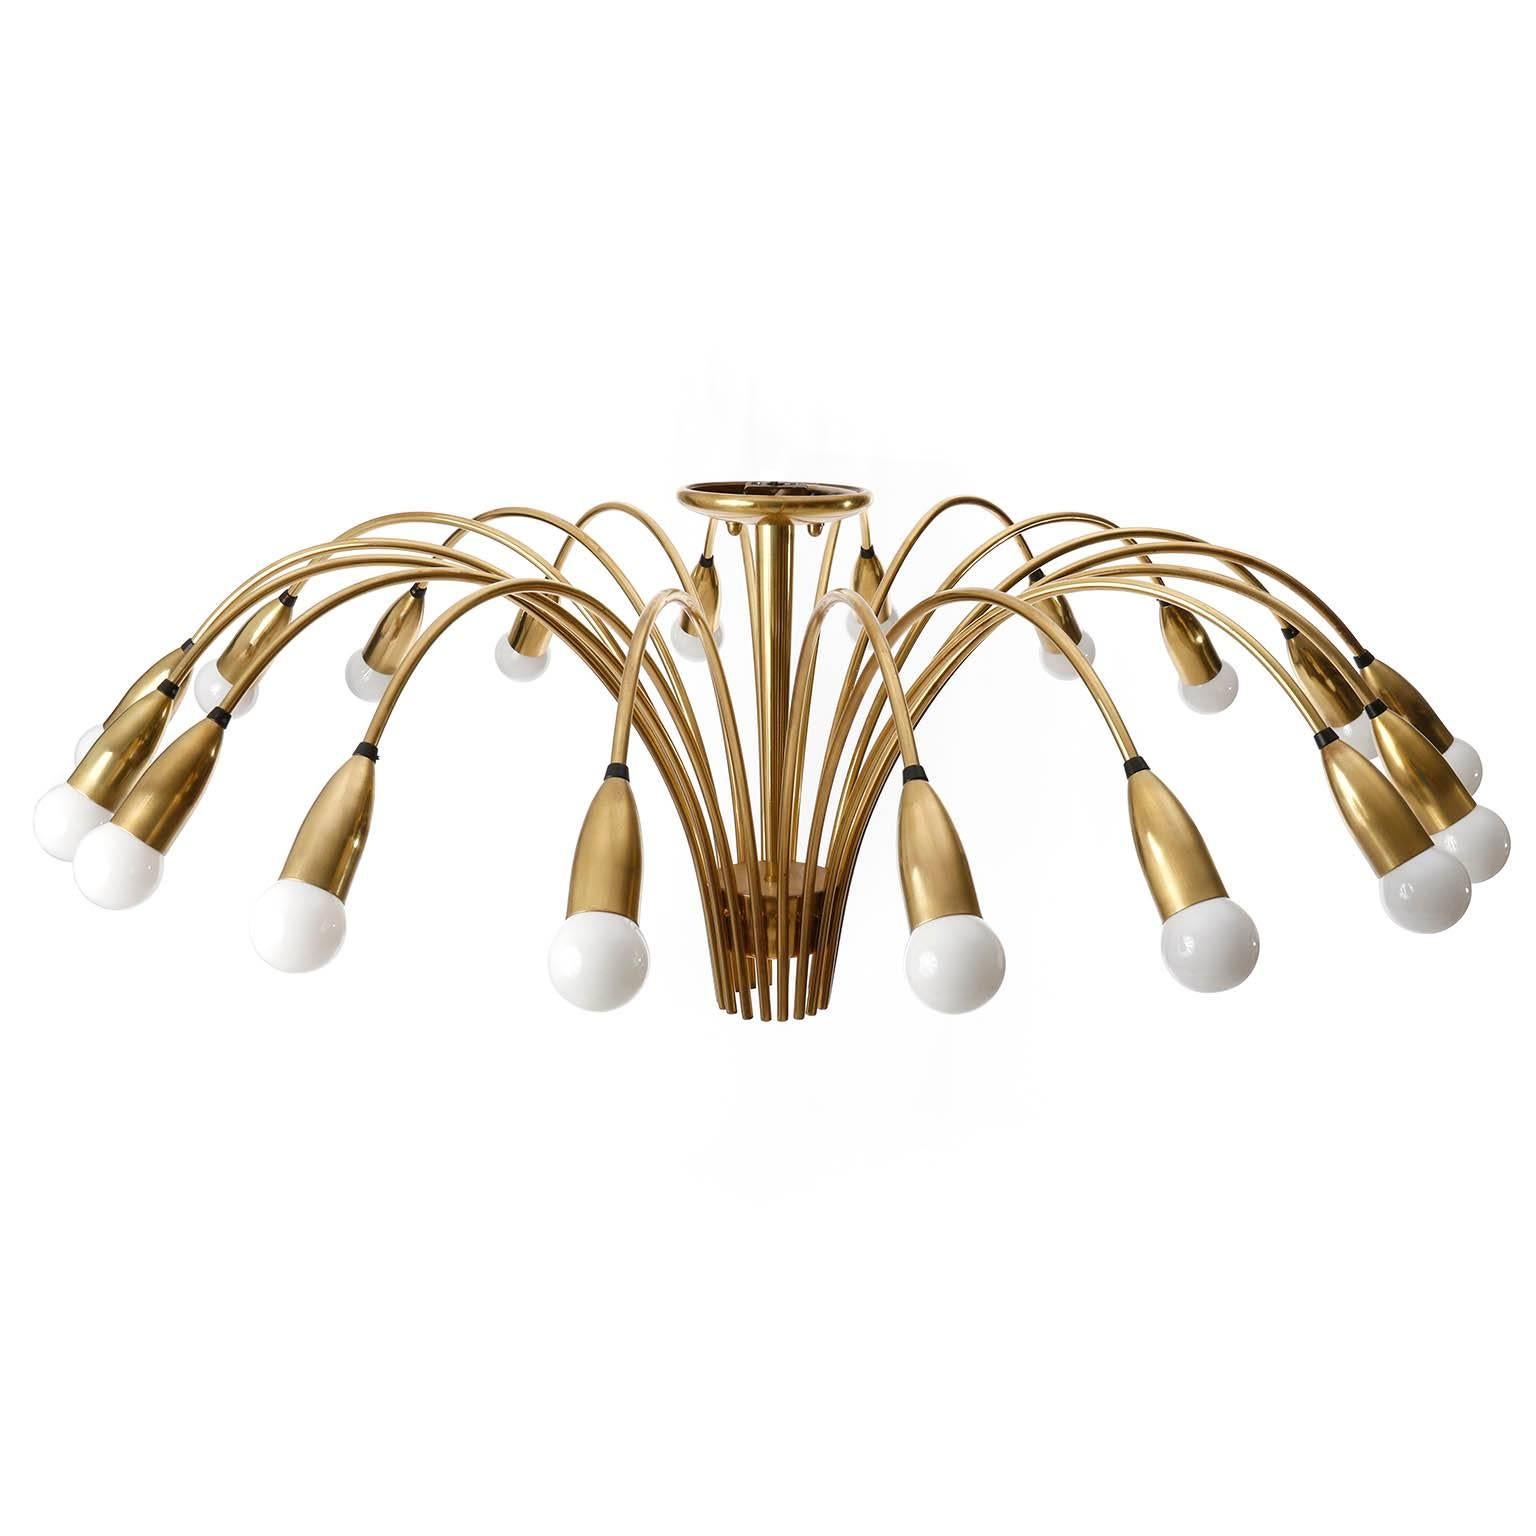 An extra-large spider or Sputnik flush mount light fixture made of polished brass. This huge 18 arm lamp is in the style of Stilnovo and was manufactured in Italy or German in Mid-Century, circa 1960 (late 1950s or early 1960s). 
The light has 18